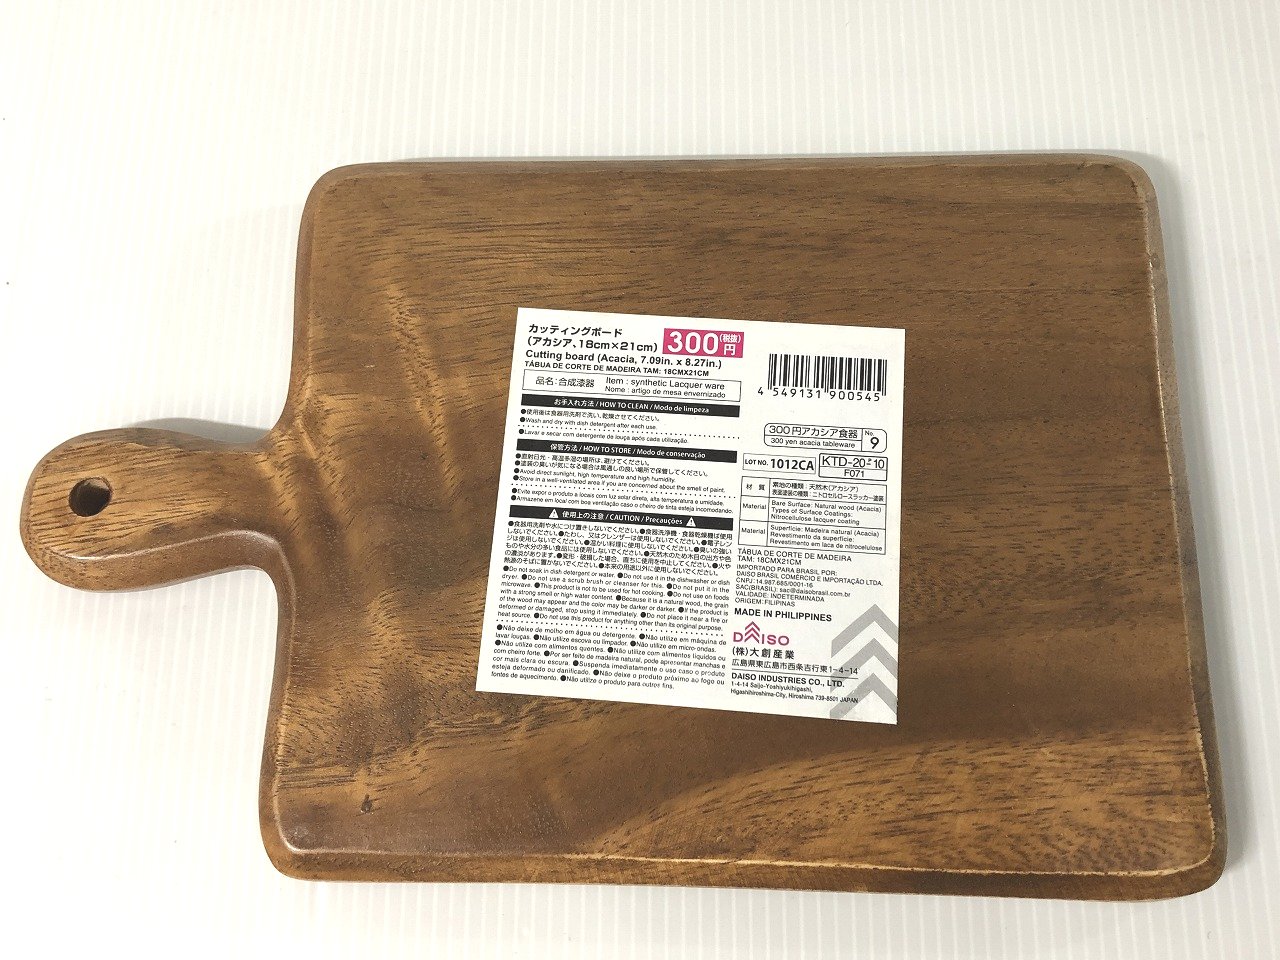 DAISO Daiso cutting board cutting board unused postage 185 jpy scratch equipped 